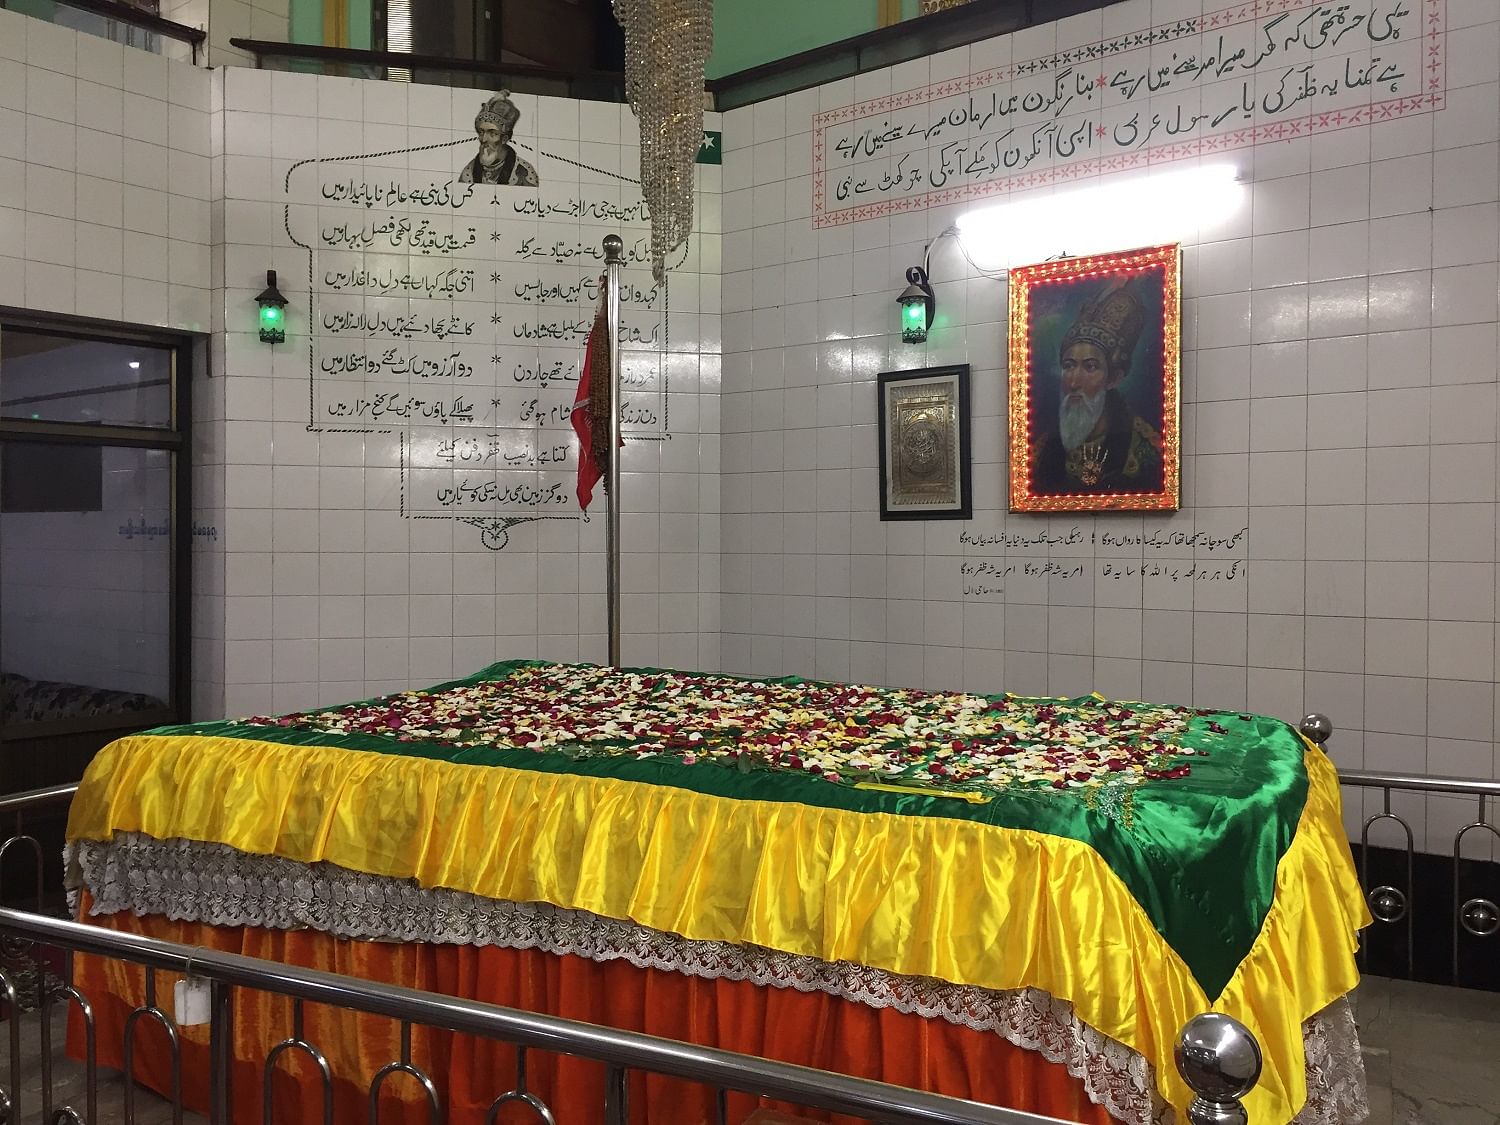 Bahadur Shah’s real burial spot lies one floor below, draped in flower petals. Photo by author